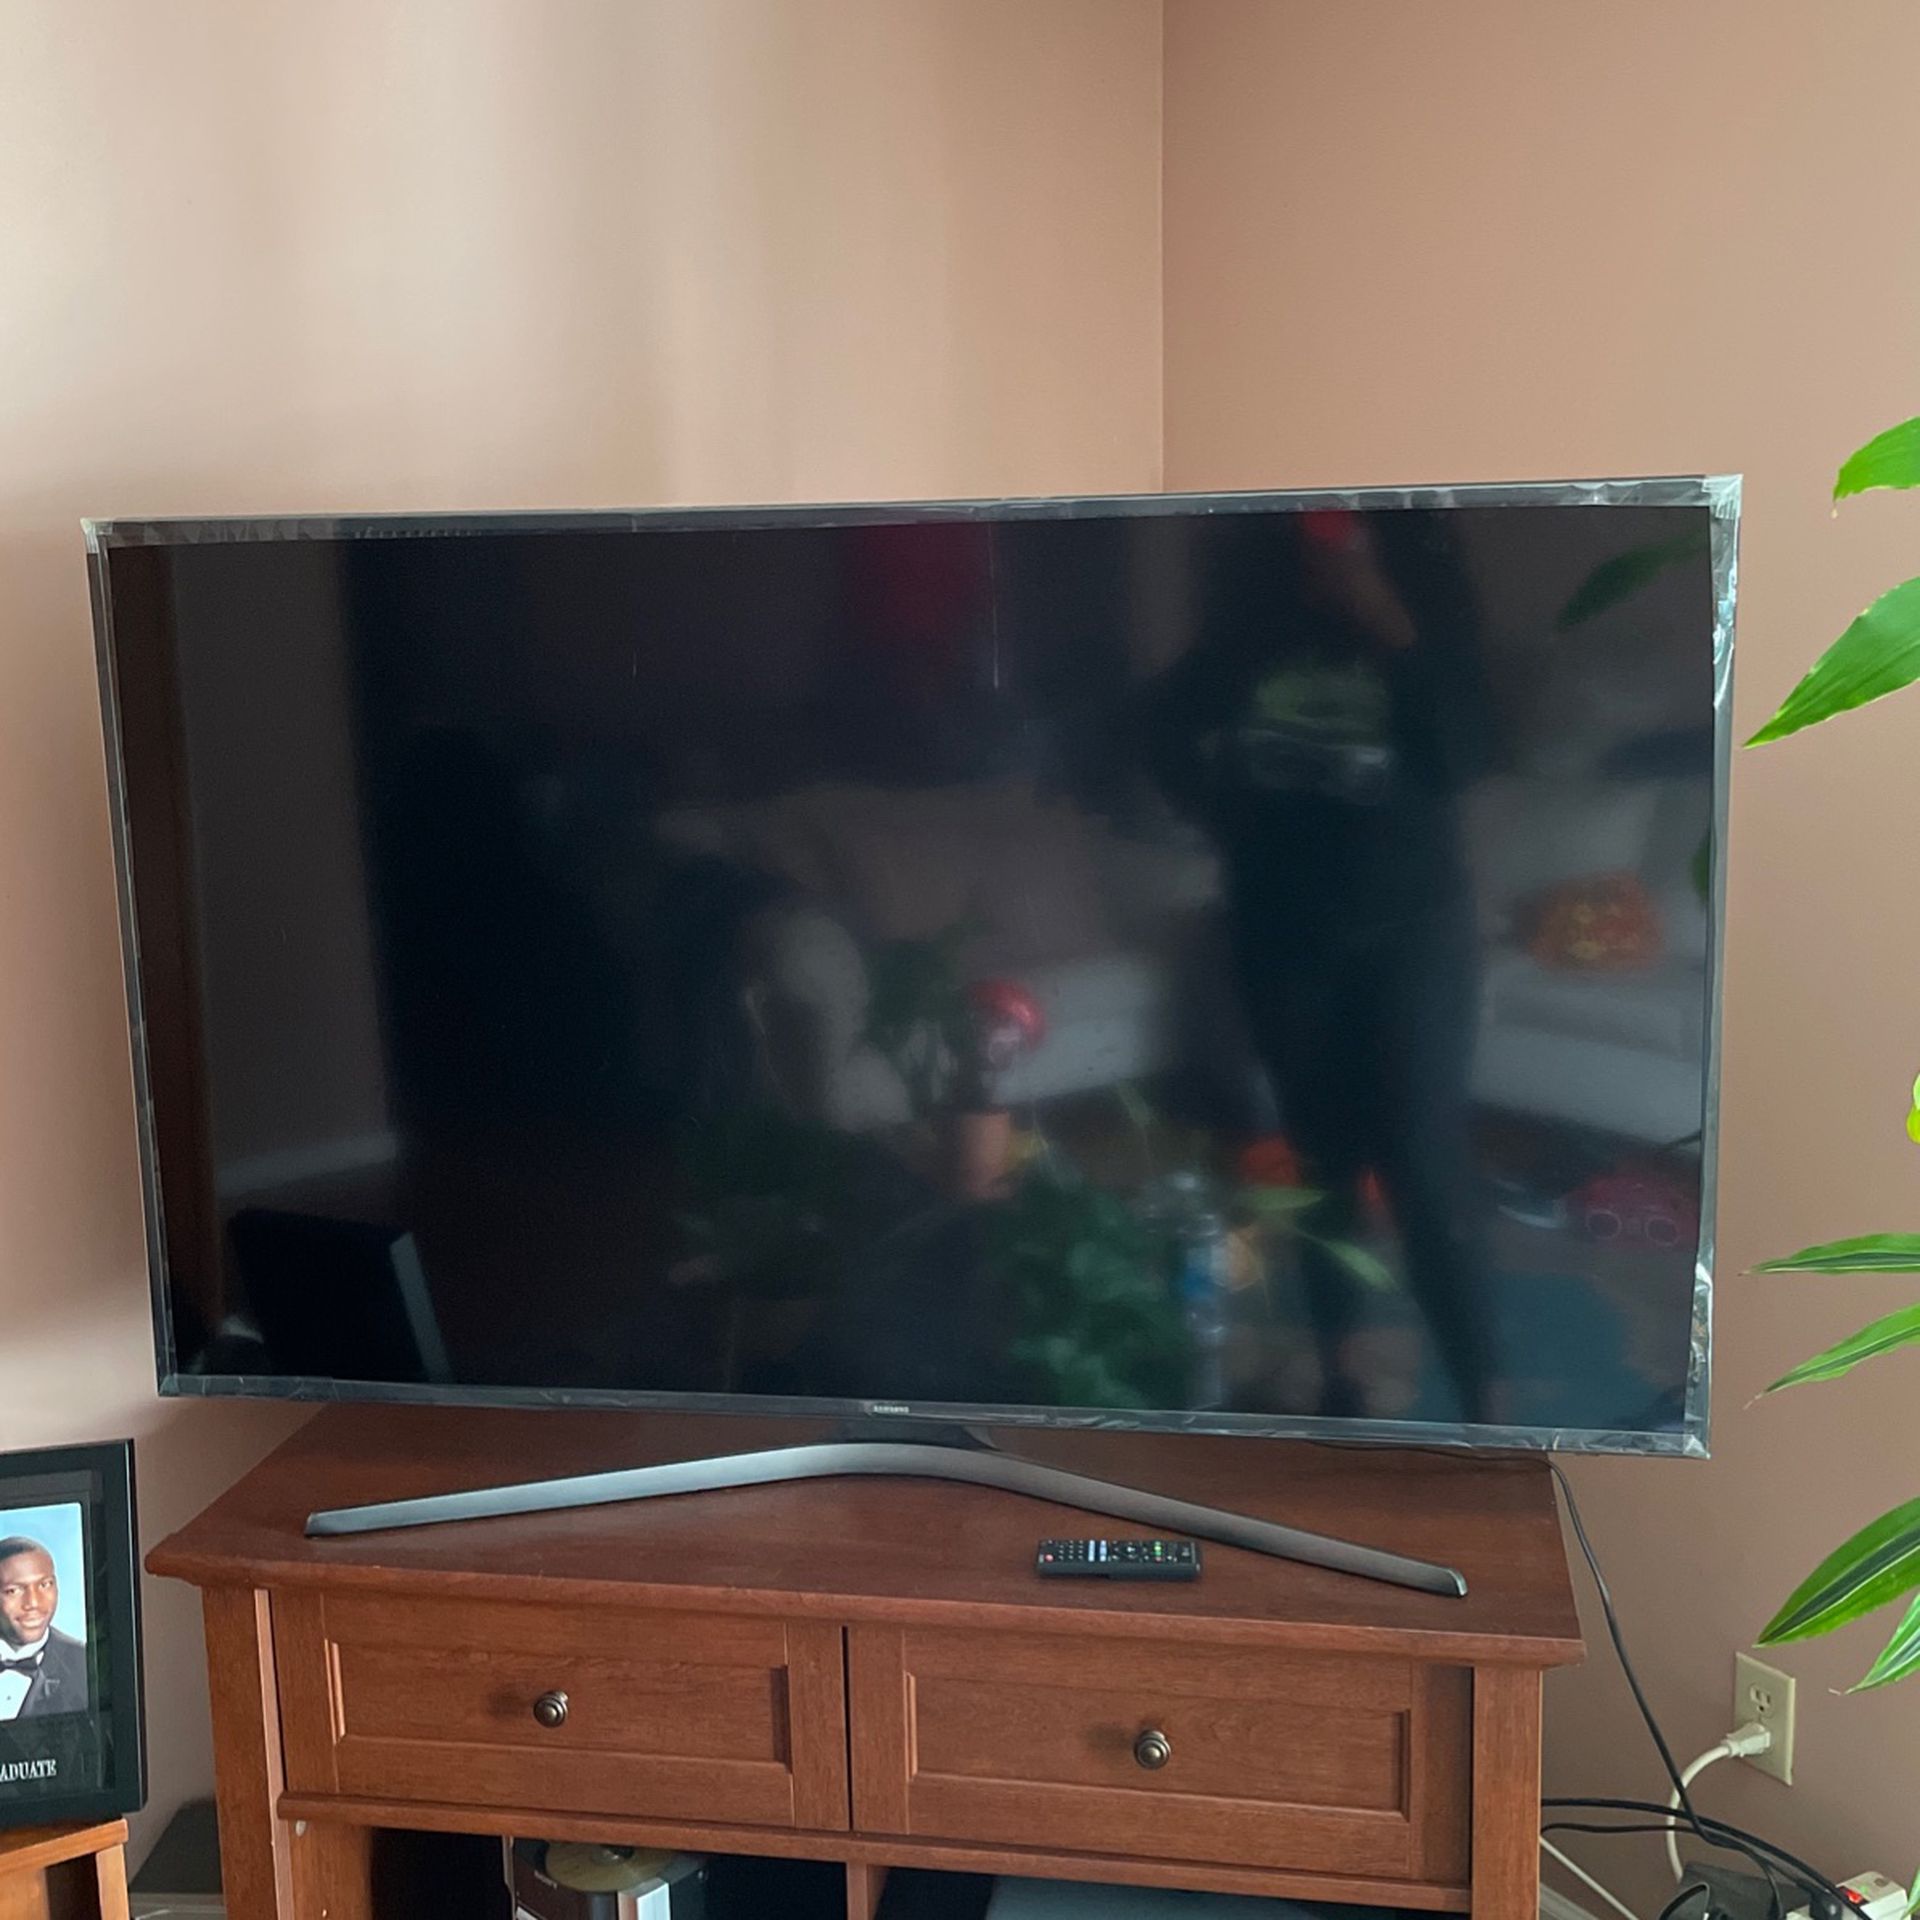 60 Inch Samsung Smart Tv 400$ With Stand 500 Needs To Be Gone By Saturday 01/23 Tv Basically New